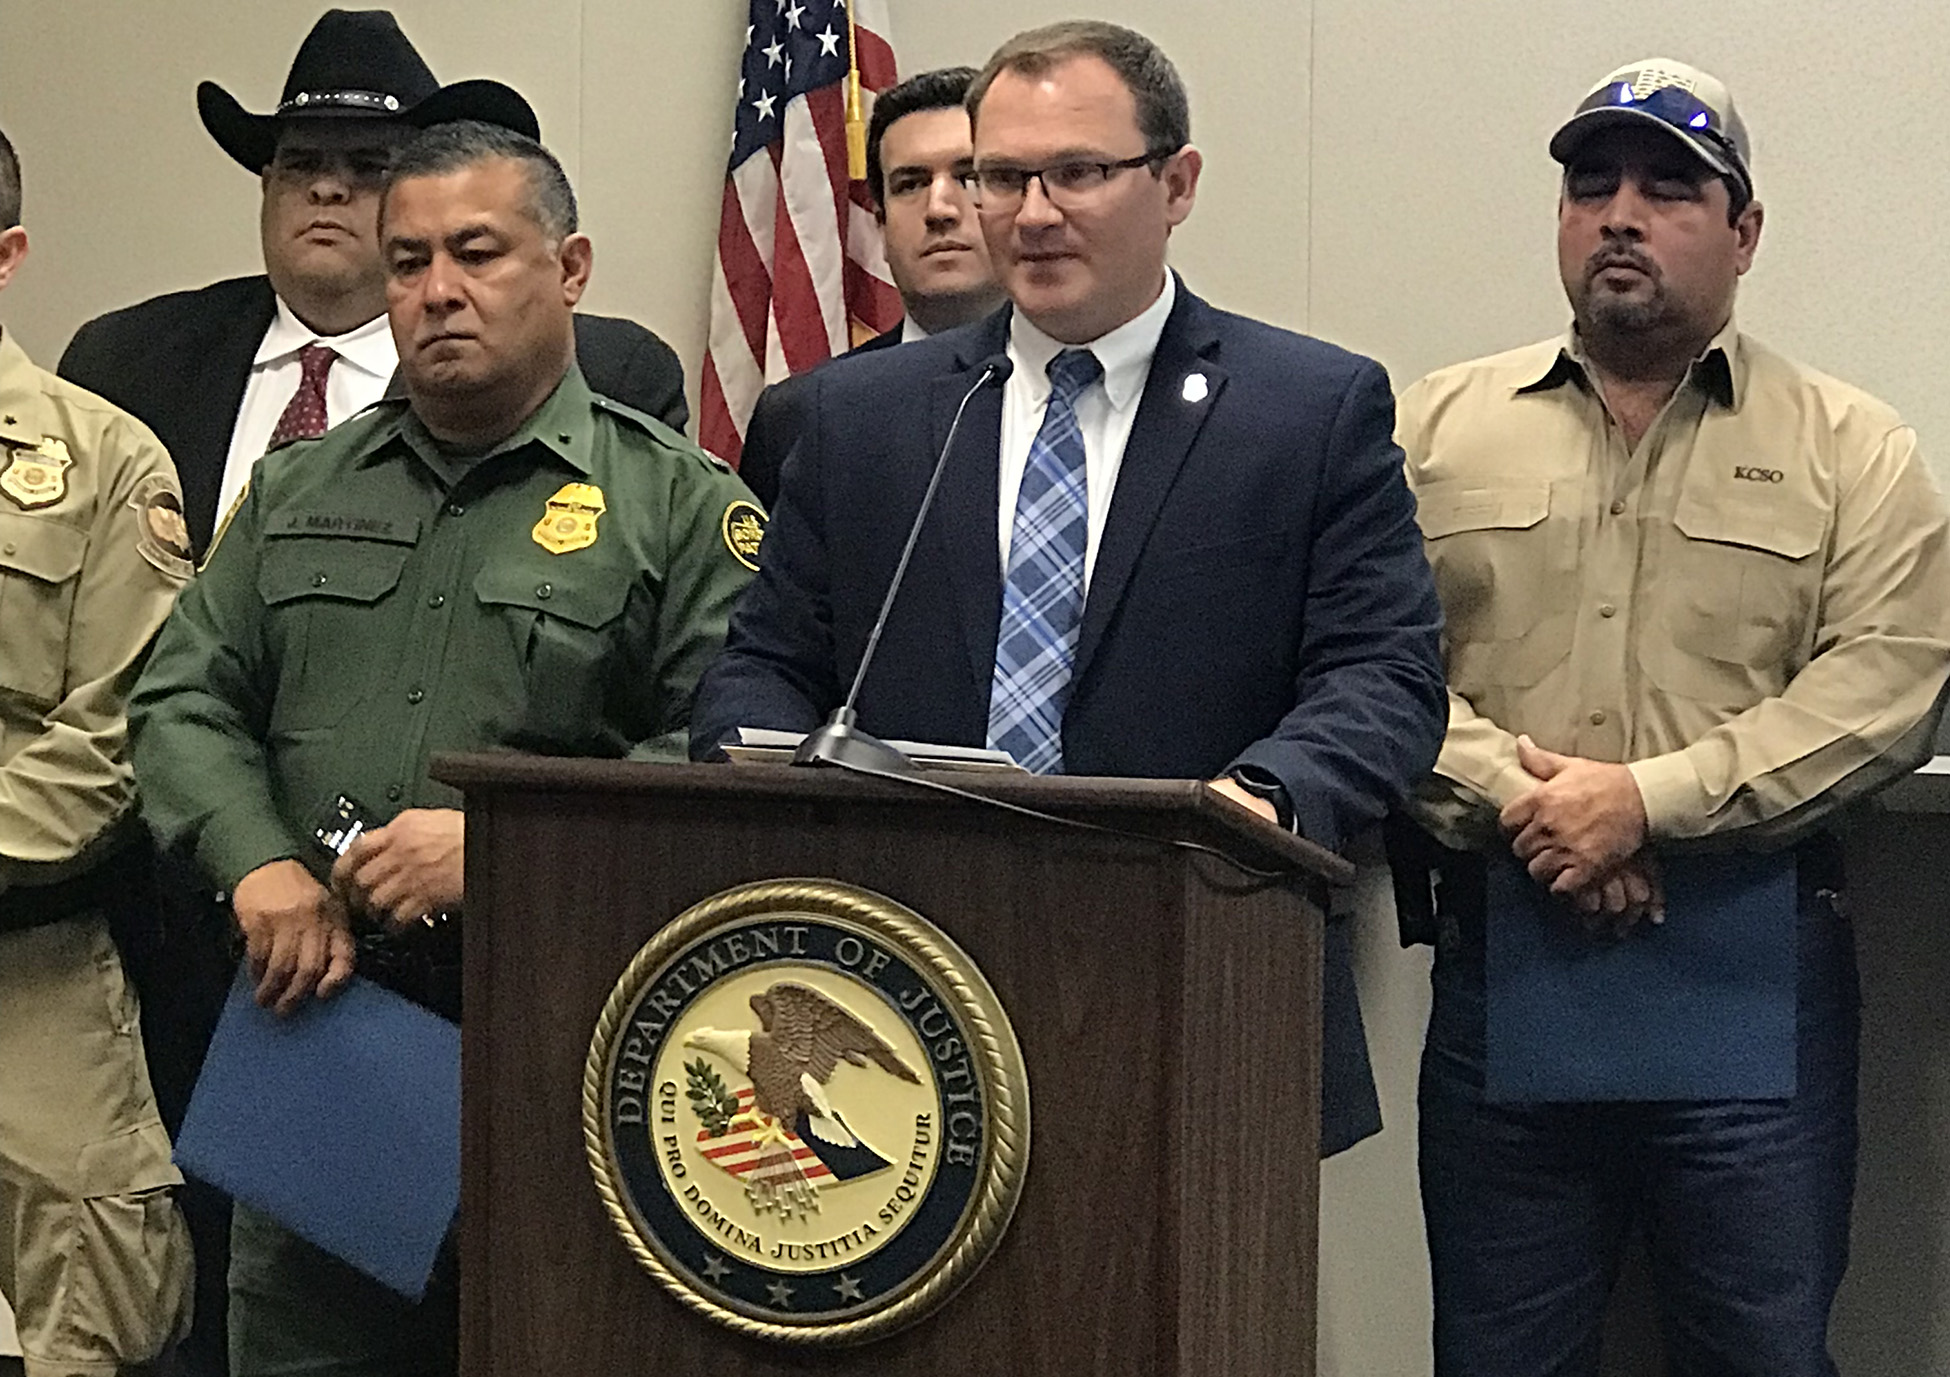 HSI San Antonio Acting Special Agent in Charge Craig Larrabee at the podium providing remarks during the USAO Southern District of Texas boating press conference. He provided information regarding HSI’s role in the investigation that led to the arrest of six suspects.